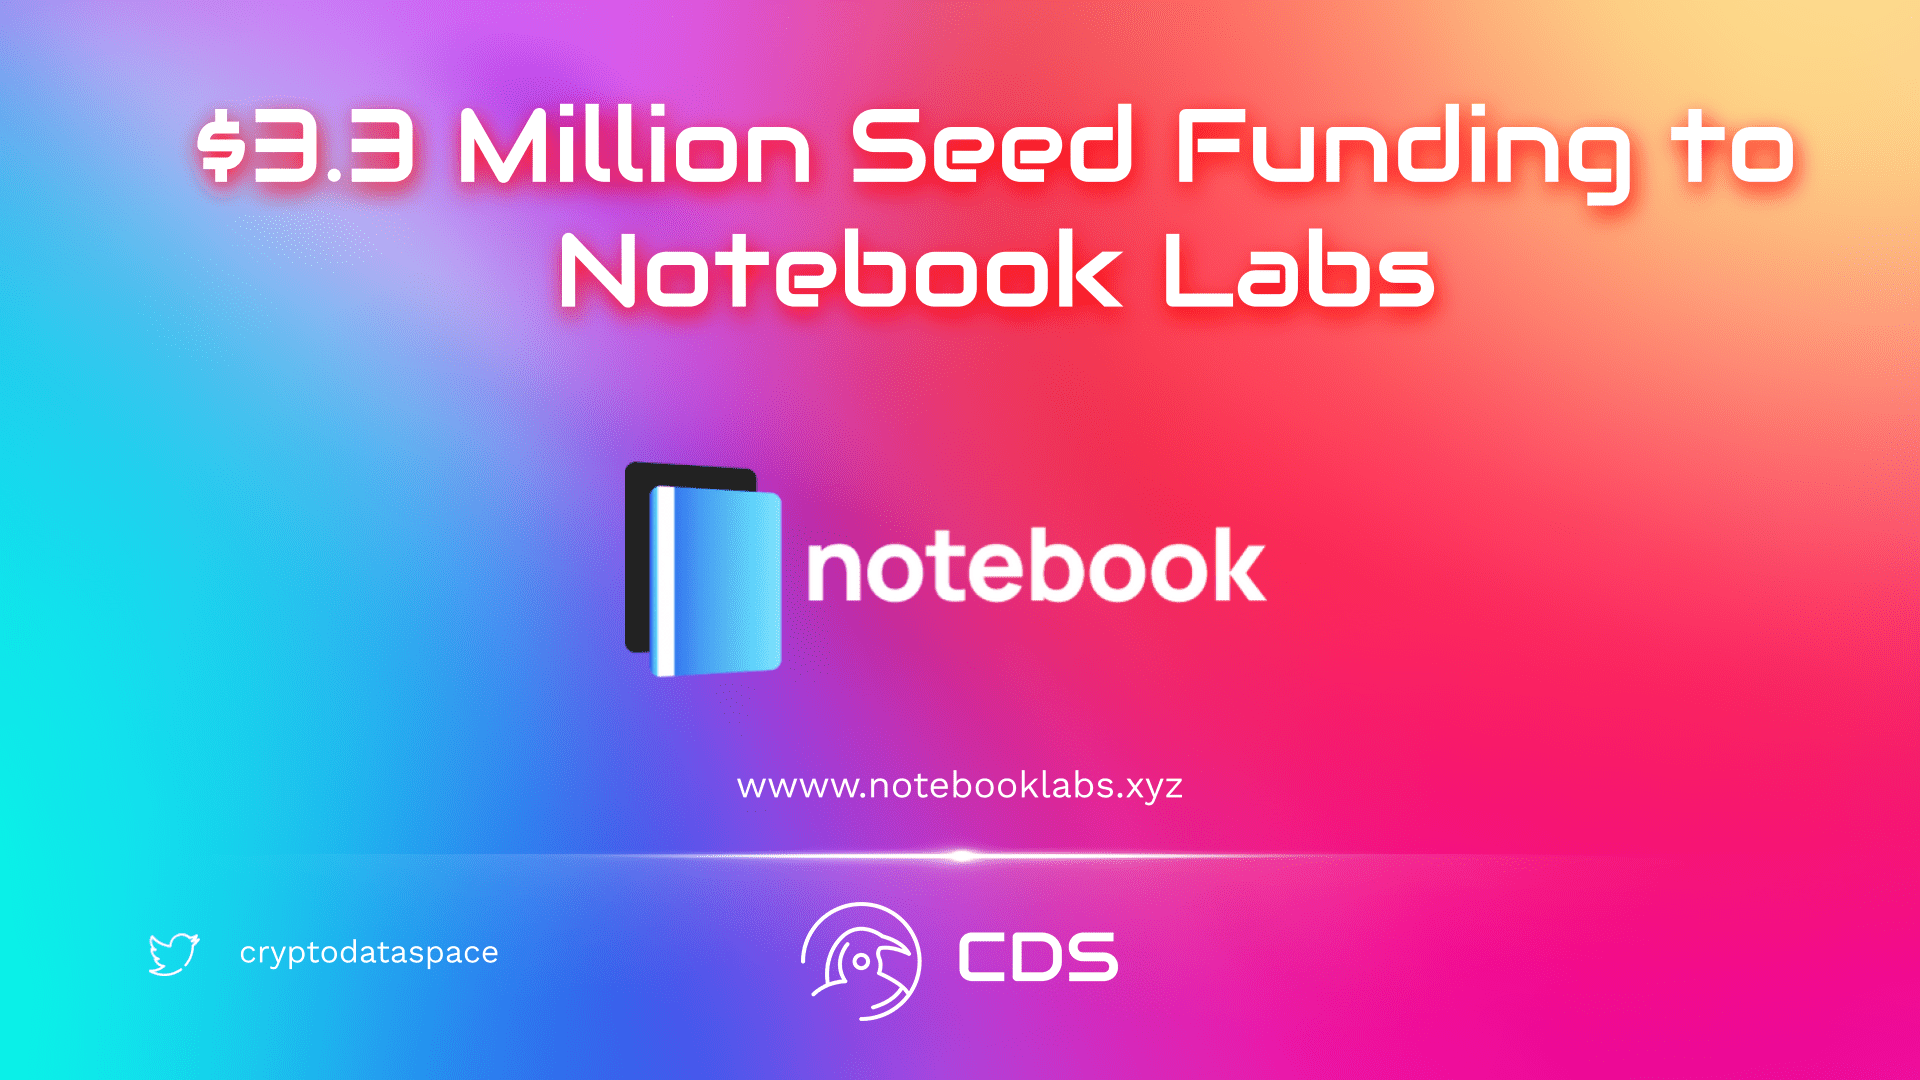 $3.3 Million Seed Funding to Notebook Labs